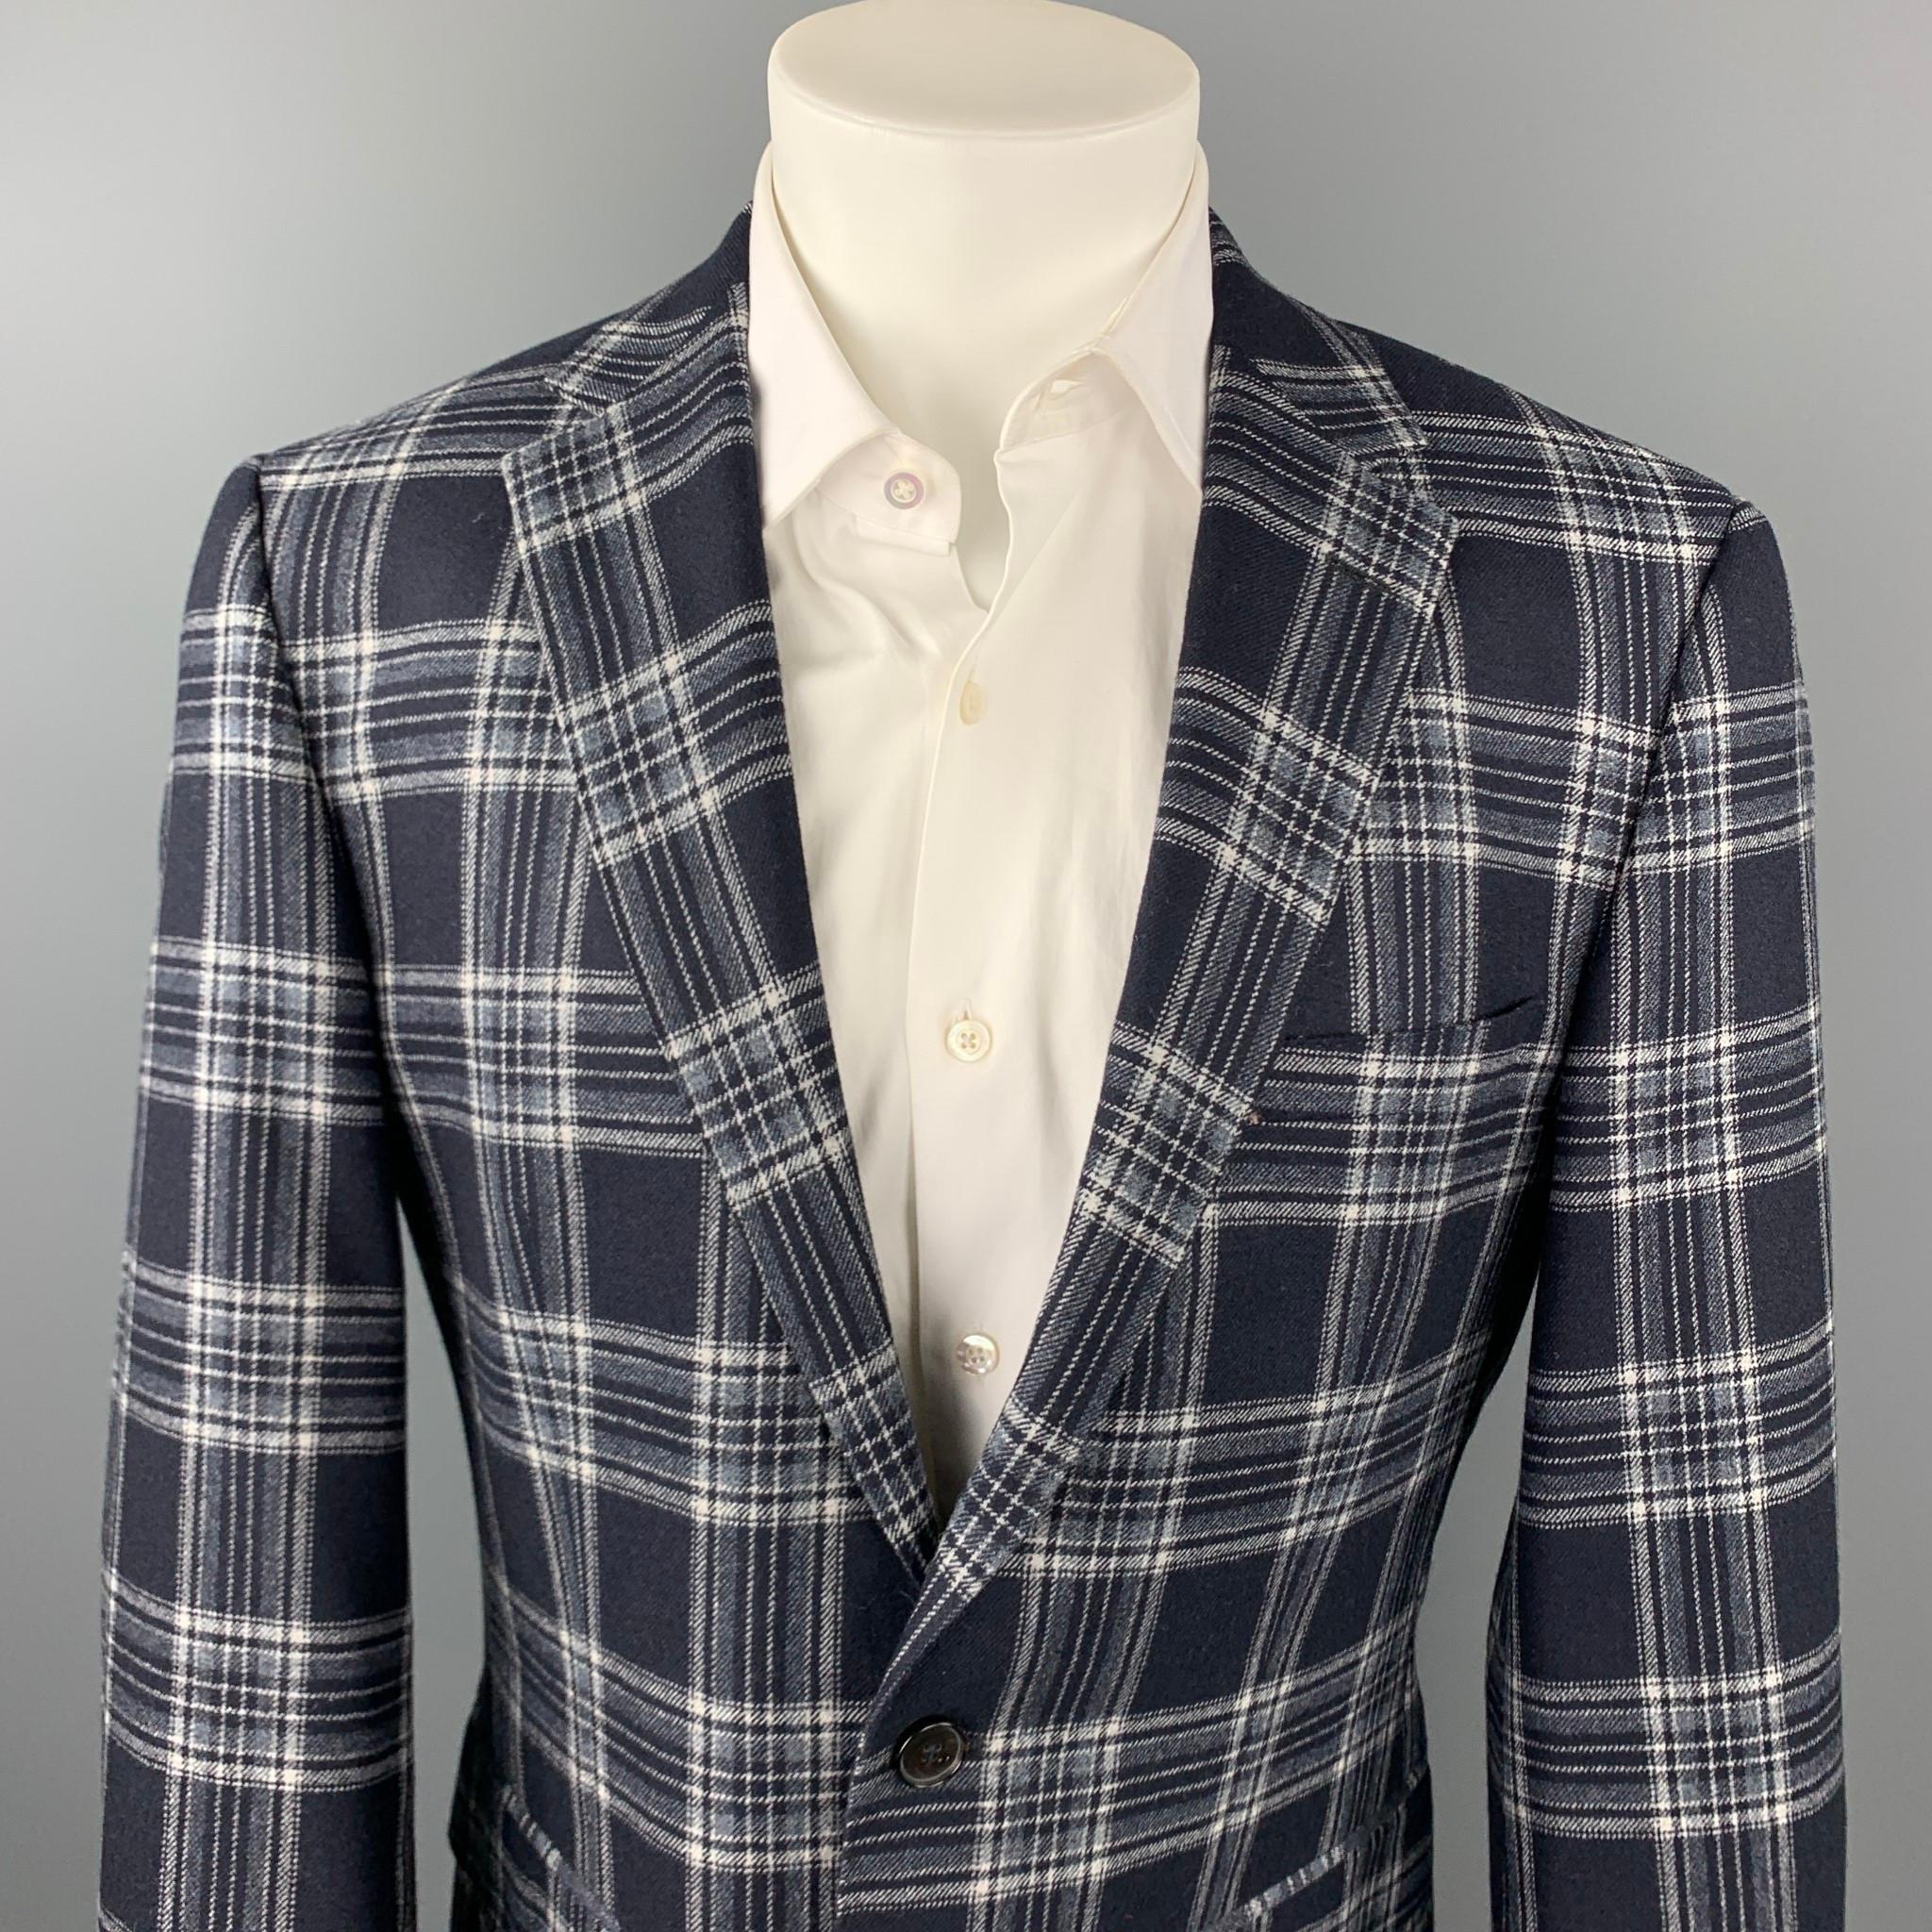 HUGO BOSS sport coat comes in a navy & grey plaid cashmere made from Loro Piana featuring a notch lapel, flap pockets, and a two button closure.

Very Good Pre-Owned Condition.
Marked: US 38 R 

Measurements:

Shoulder: 18.5 in. 
Chest: 40 in.